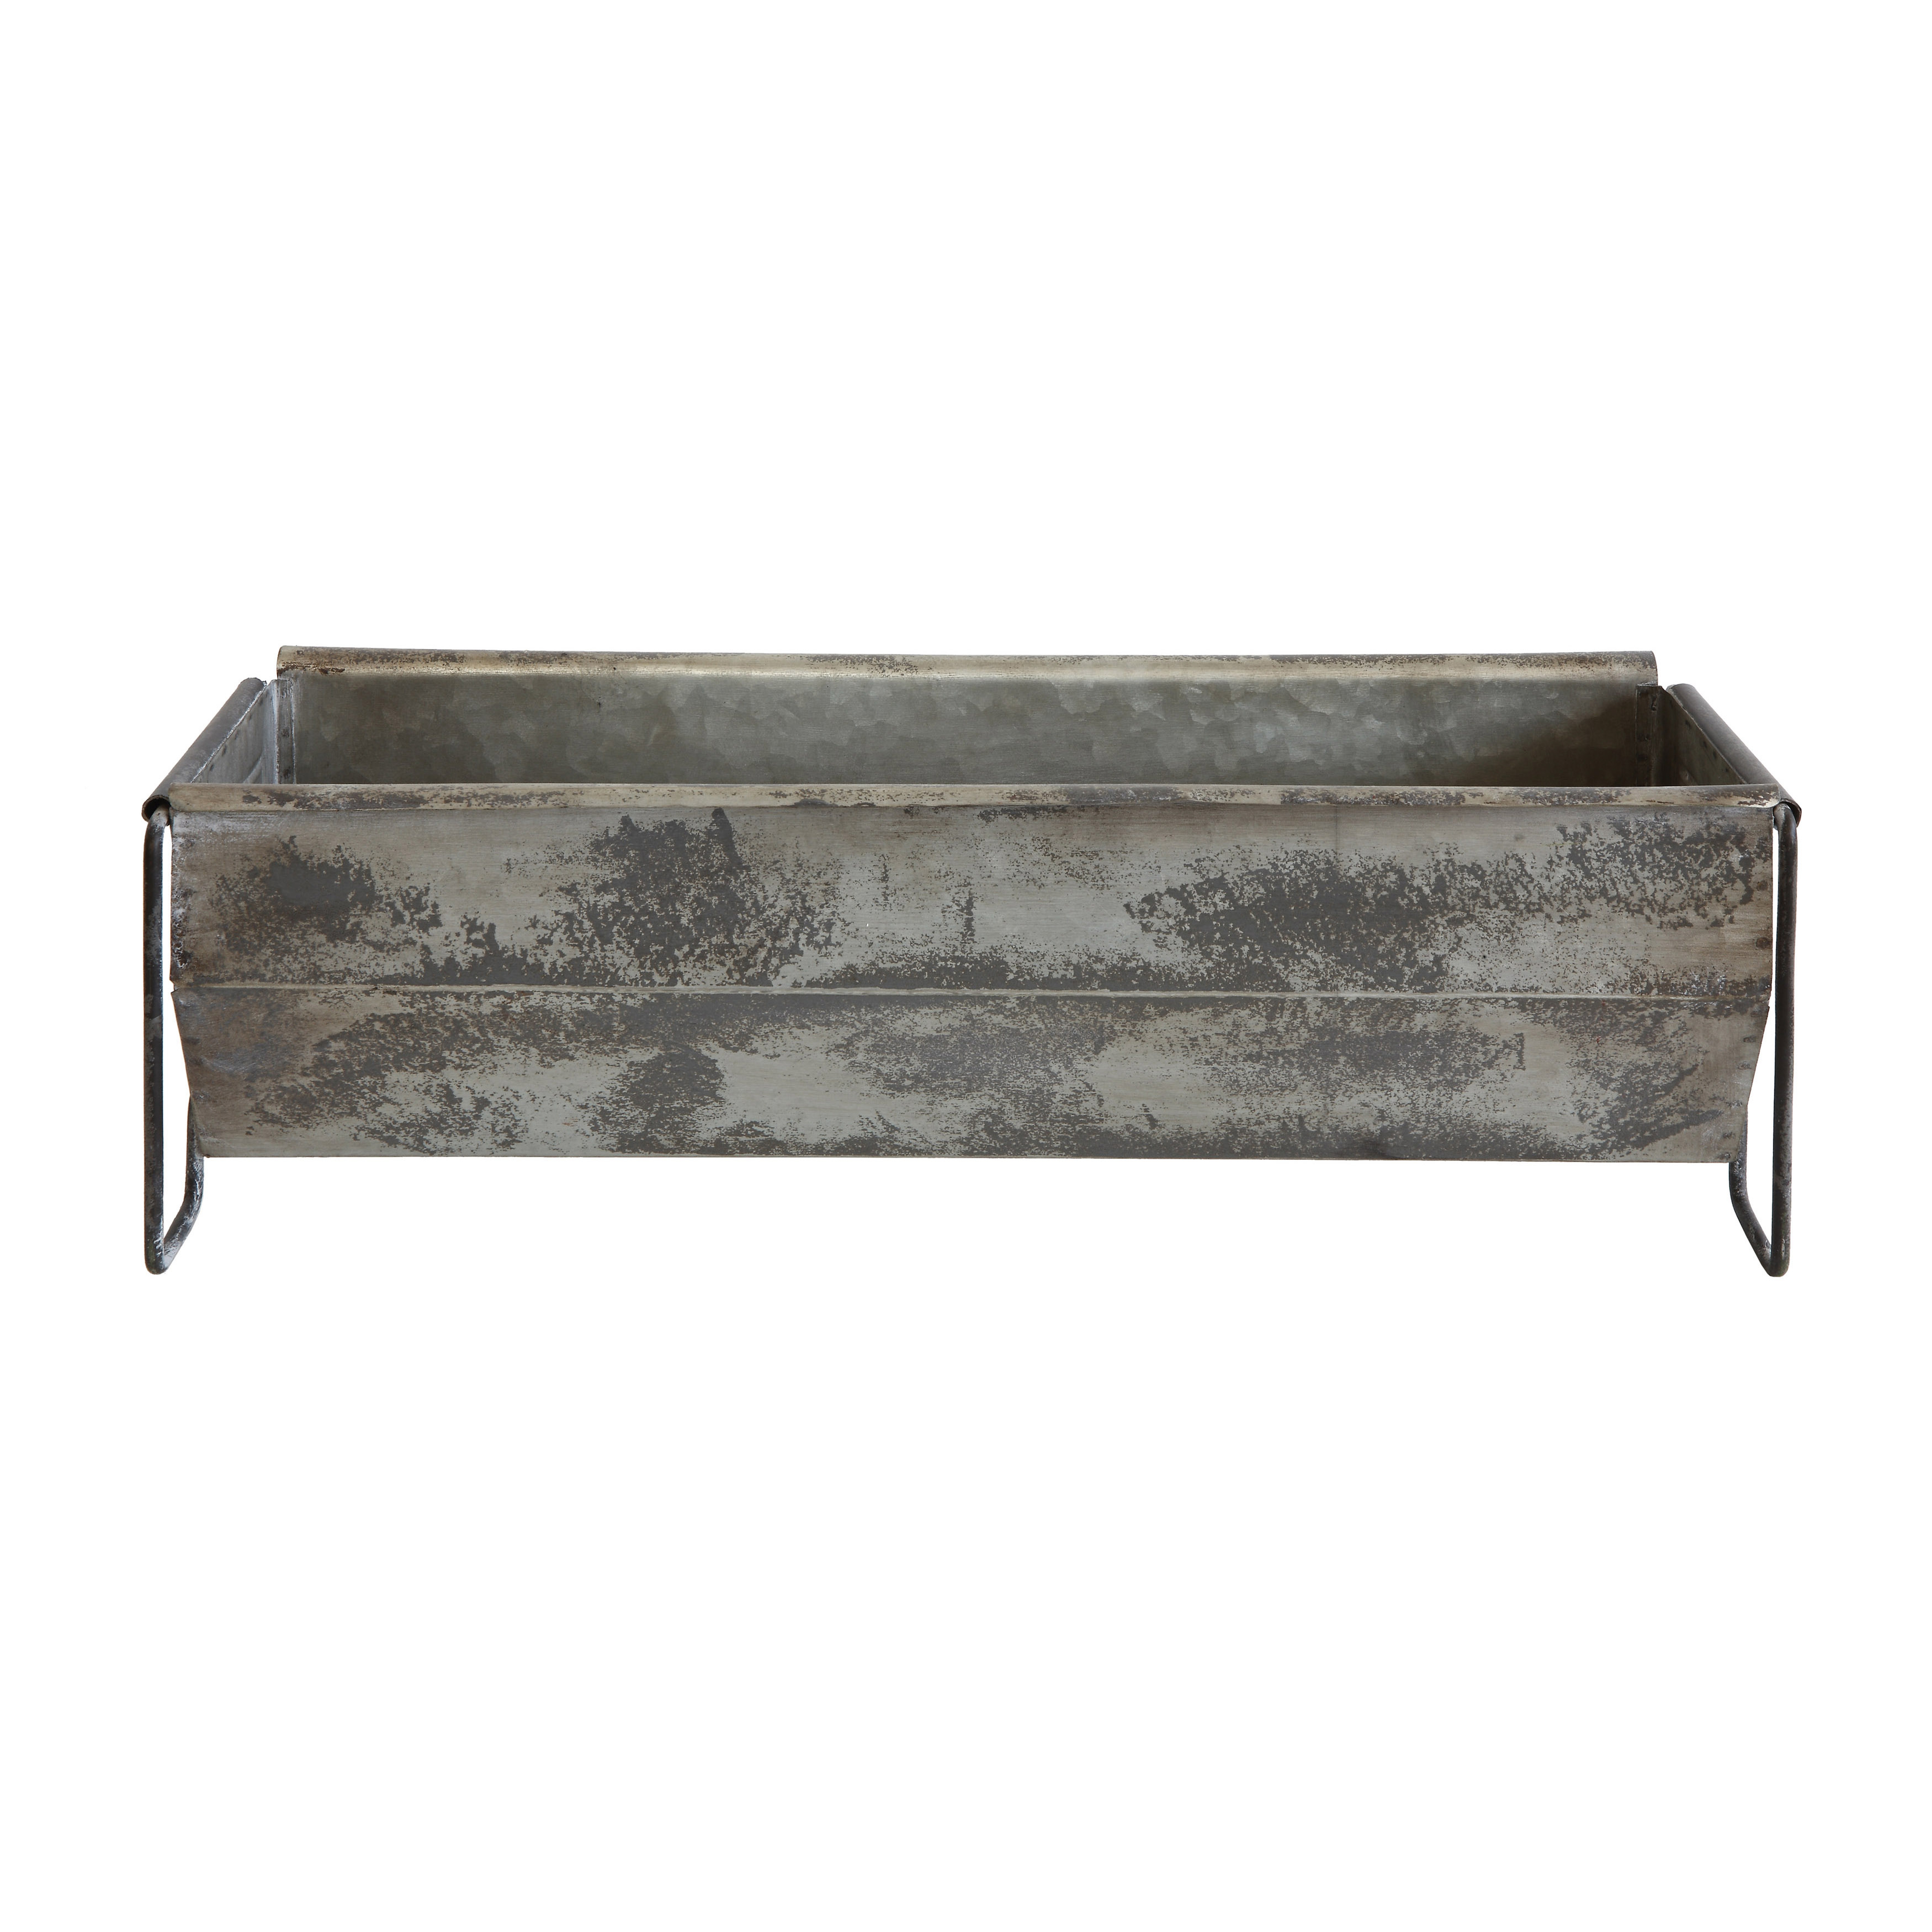 Metal Trough Container with Distressed Zinc Finish - Nomad Home